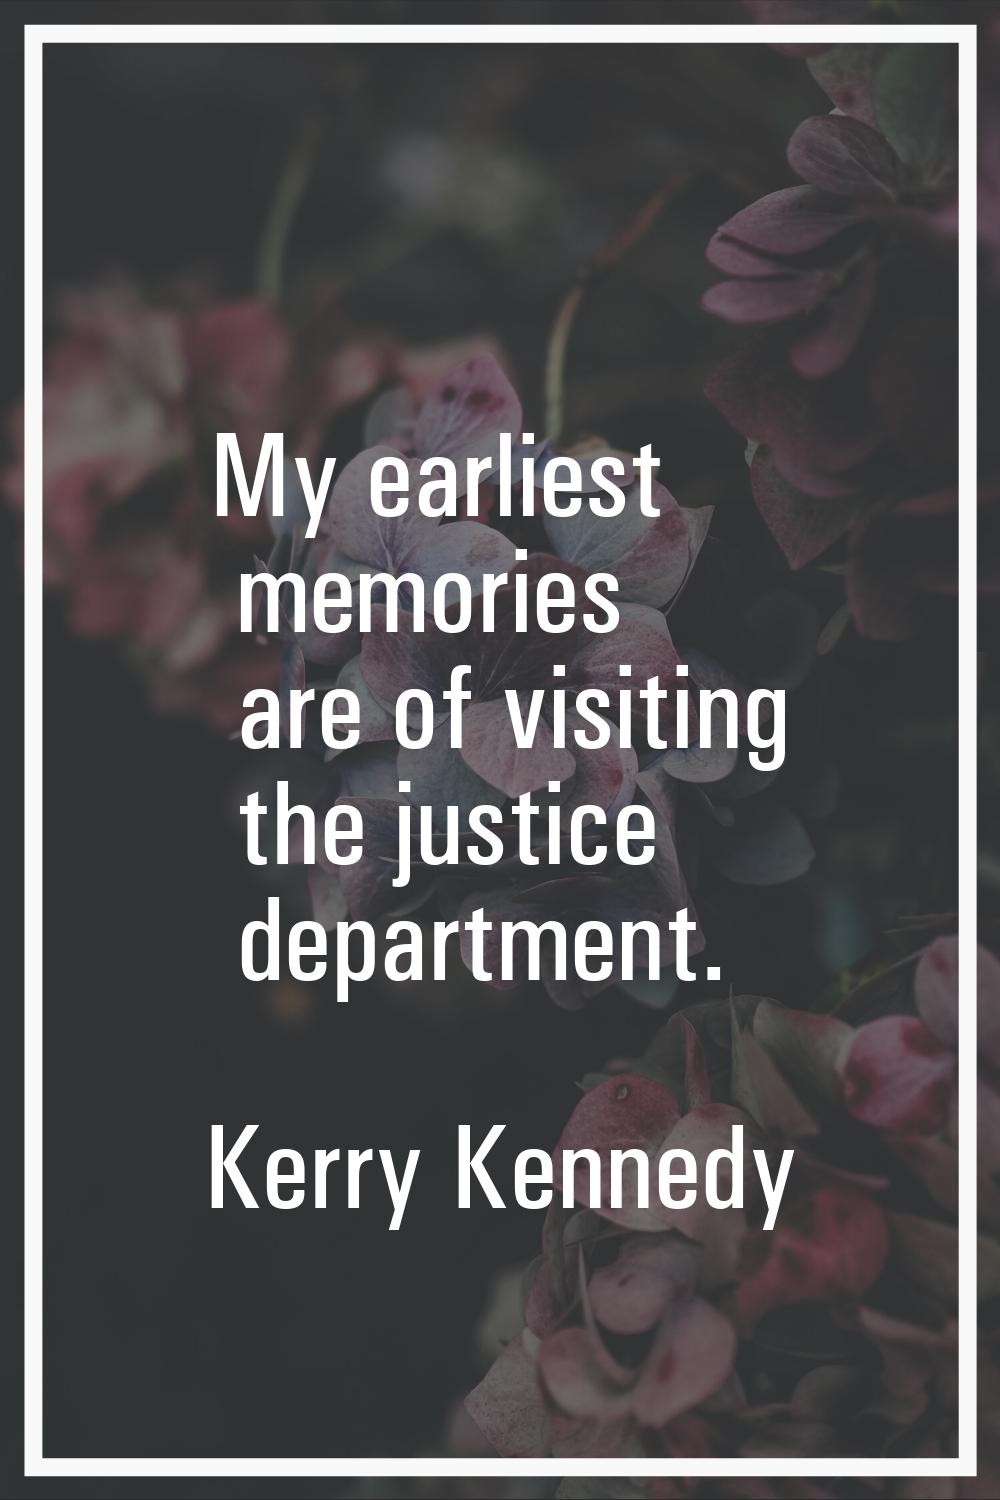 My earliest memories are of visiting the justice department.